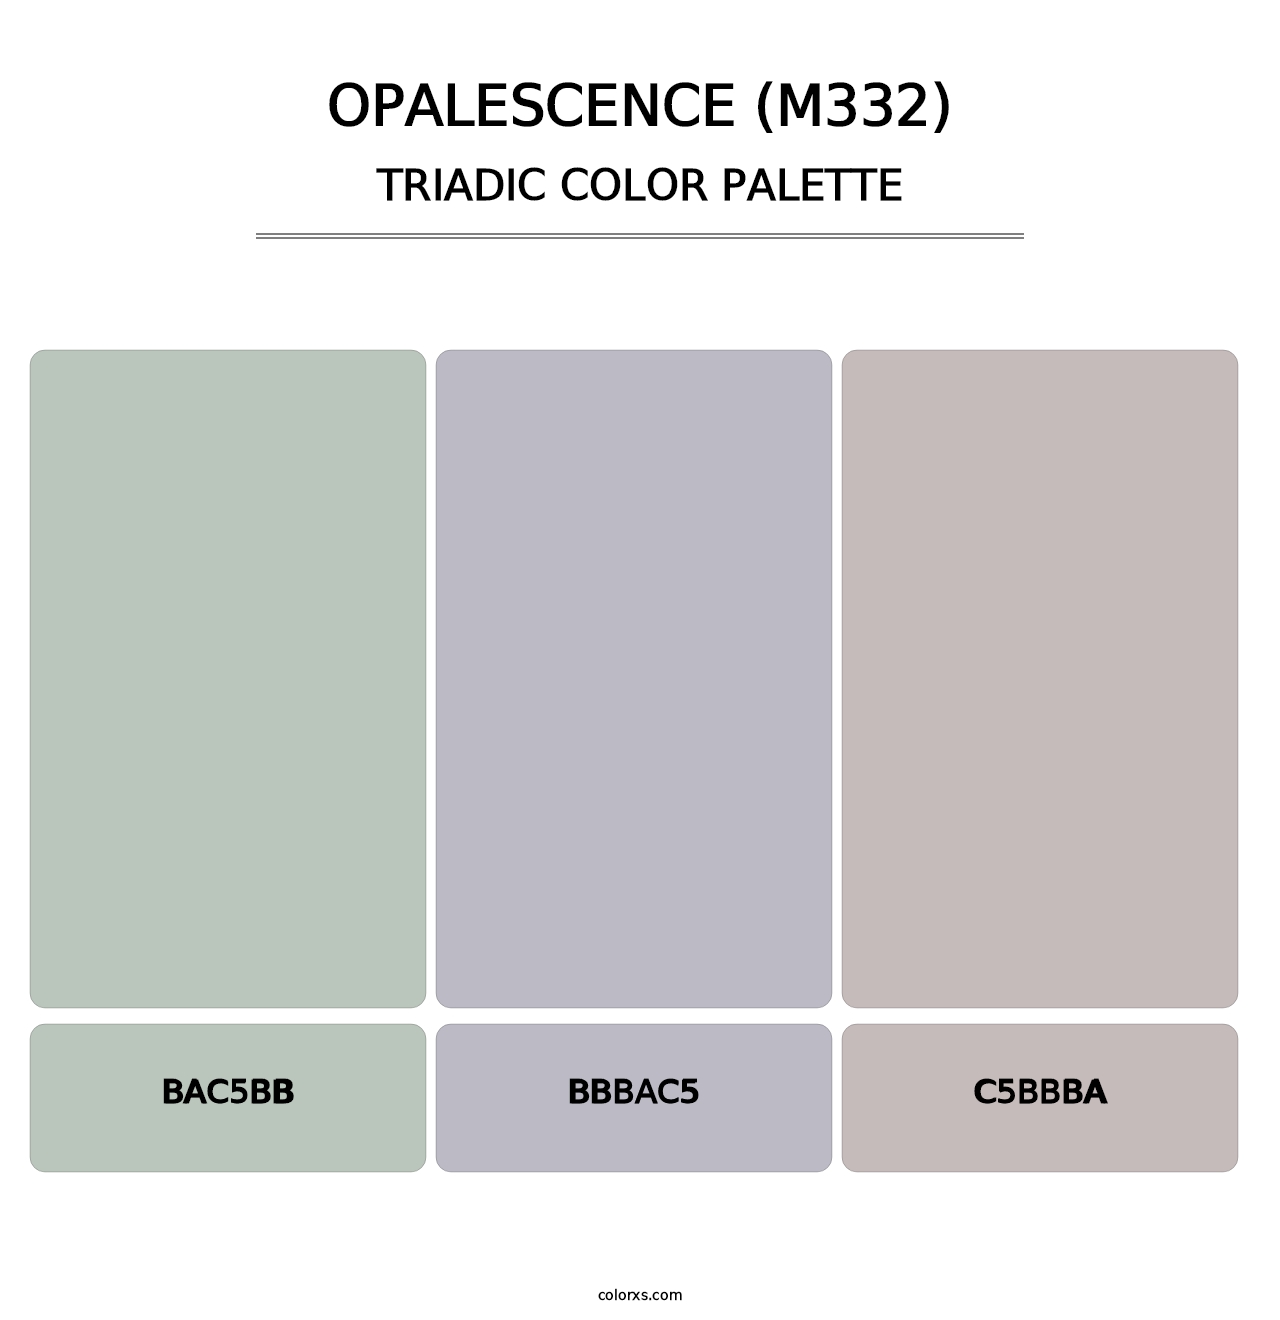 Opalescence (M332) - Triadic Color Palette